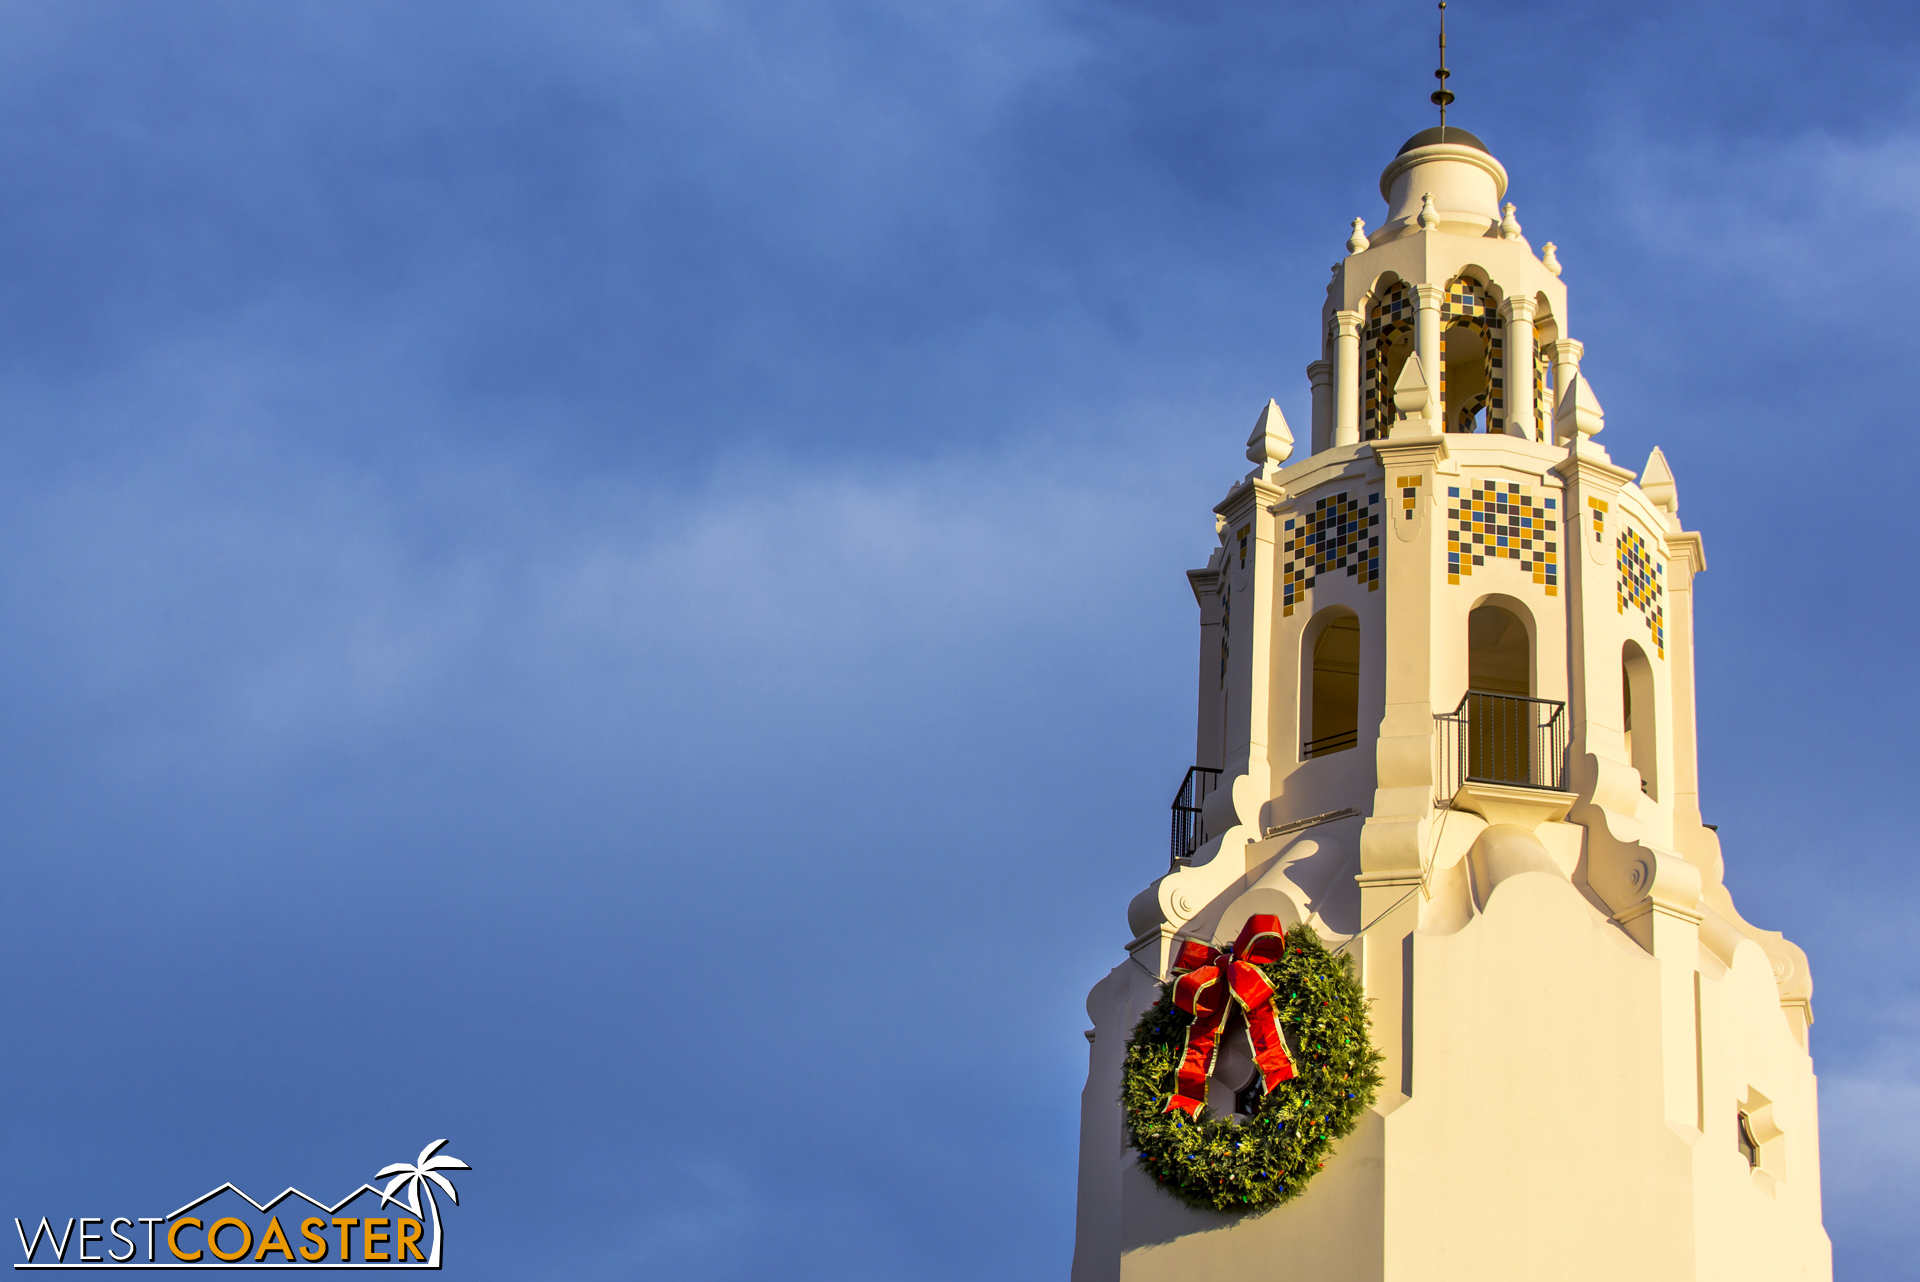  The Carthay Circle Restaurant tower isn't as elaborately themed as during Halloween, but I like the simple elegance of the giant wreath. 